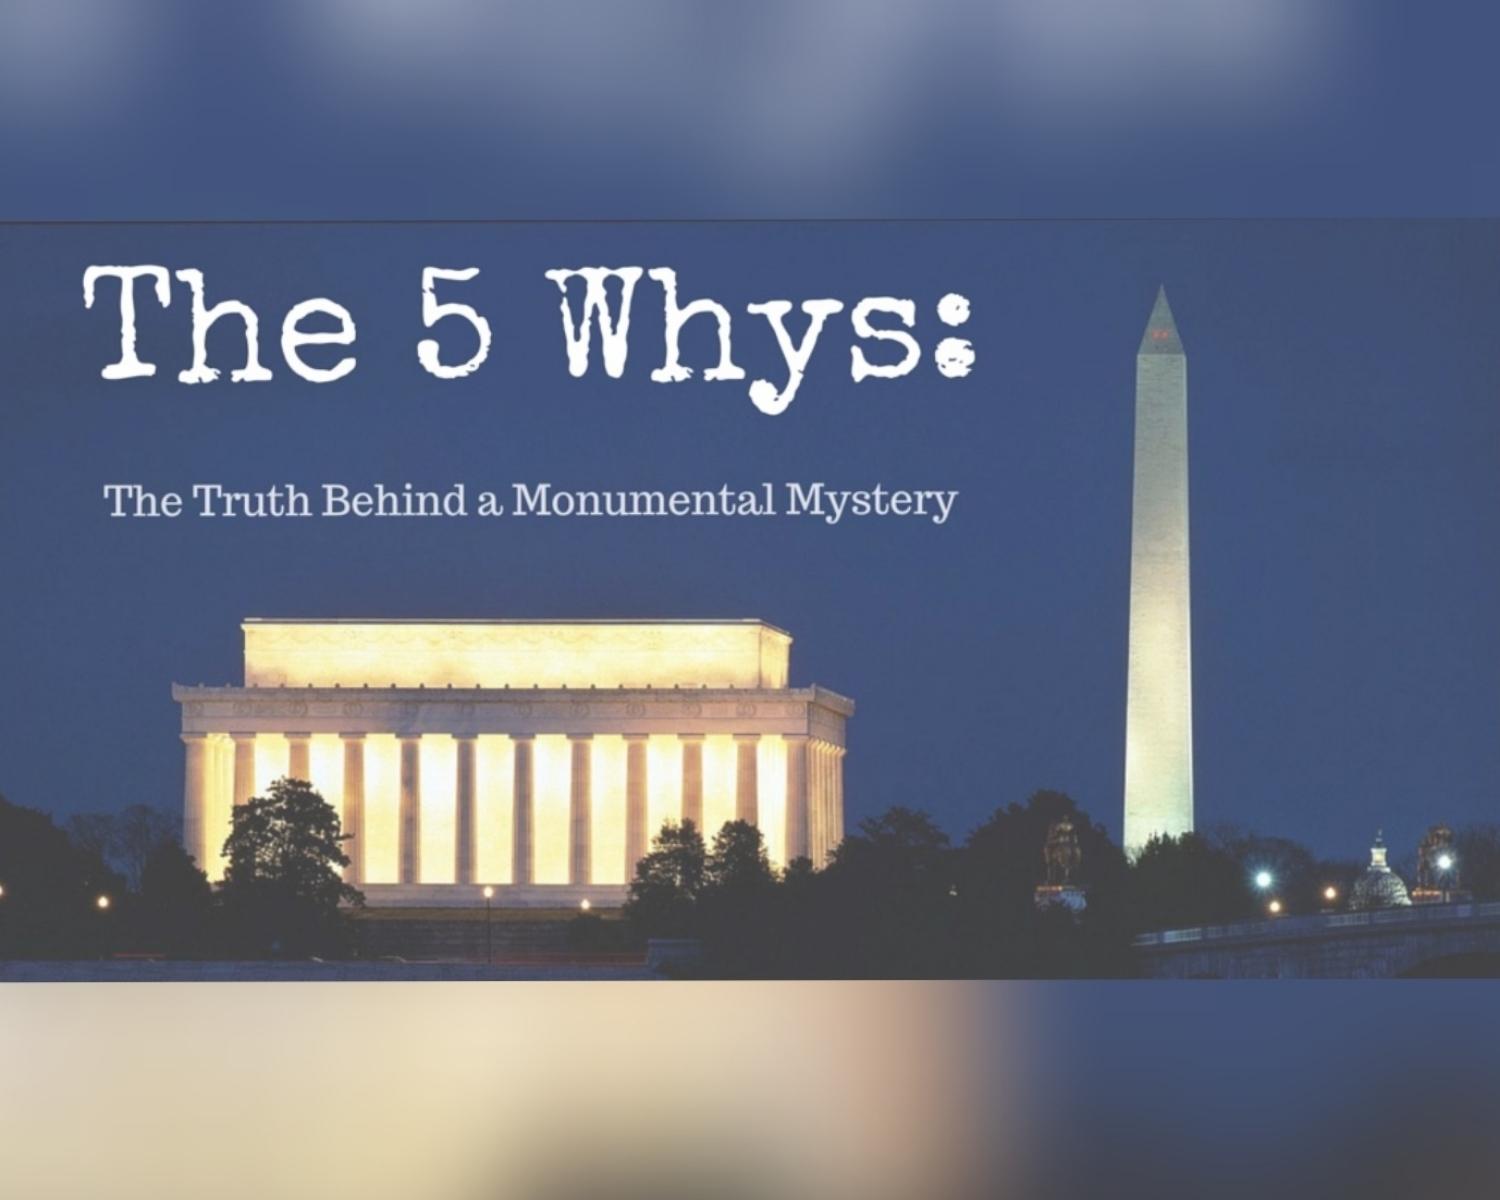 Saving The Washington Monument: First Of Five Whys